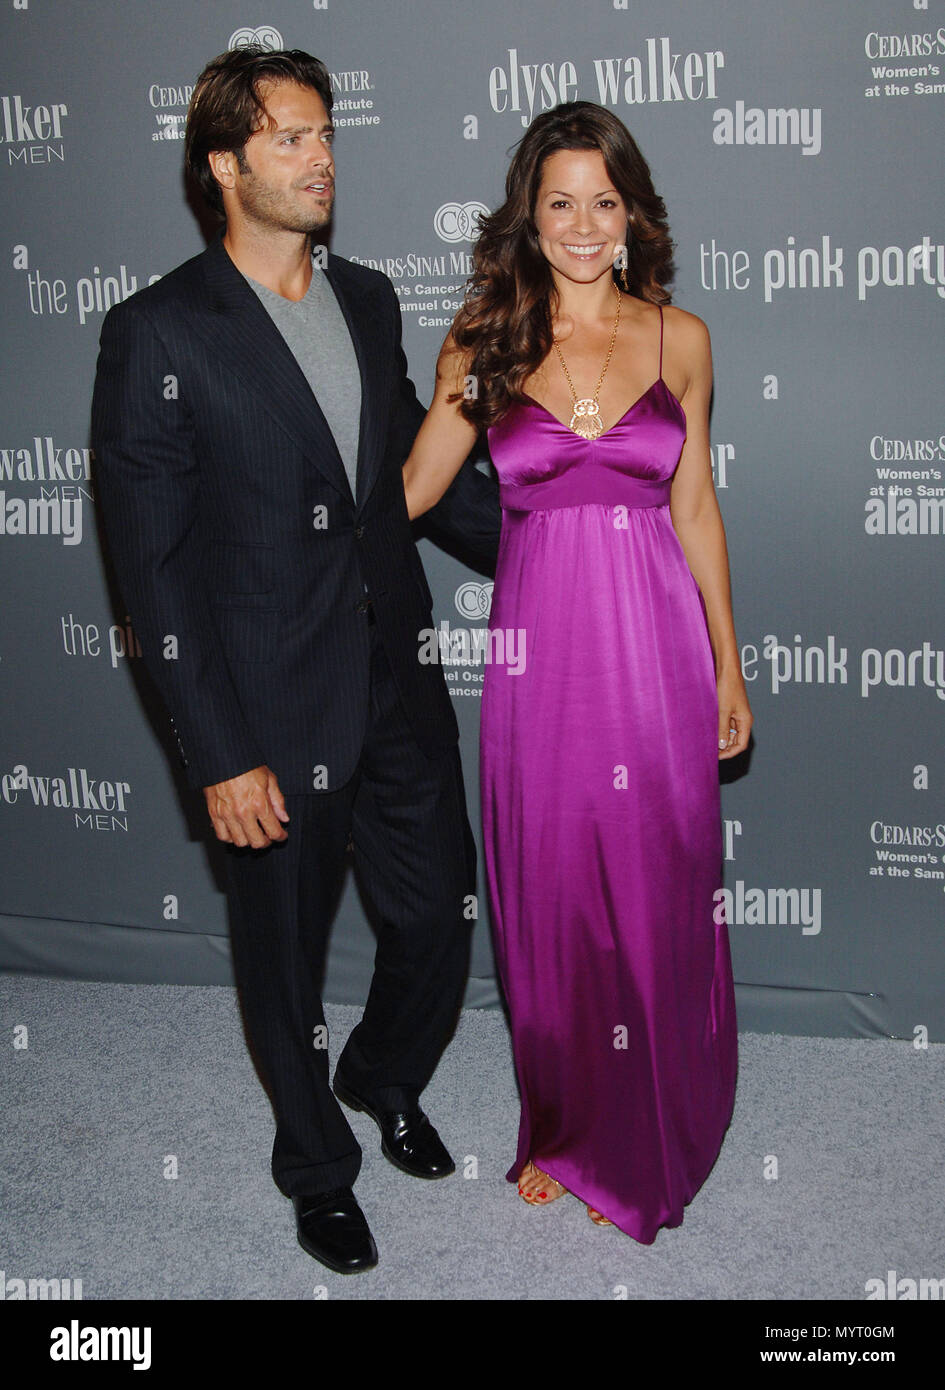 David Charvet and wife Brooke Burke  -  4TH Annual Pink Party To Benefit Cedars-SSinai's Women Cancer Research Institute at the Santa Monica Airport  In Los Angeles.  full length eye contact smile CharvetDavid BurkeBrooke 56  Event in Hollywood Life - California, Red Carpet Event, USA, Film Industry, Celebrities, Photography, Bestof, Arts Culture and Entertainment, Celebrities fashion, Best of, Hollywood Life, Event in Hollywood Life - California, Red Carpet and backstage, Music celebrities, Topix, Couple, family ( husband and wife ) and kids- Children, brothers and sisters inquiry tsuni@Gamma Stock Photo